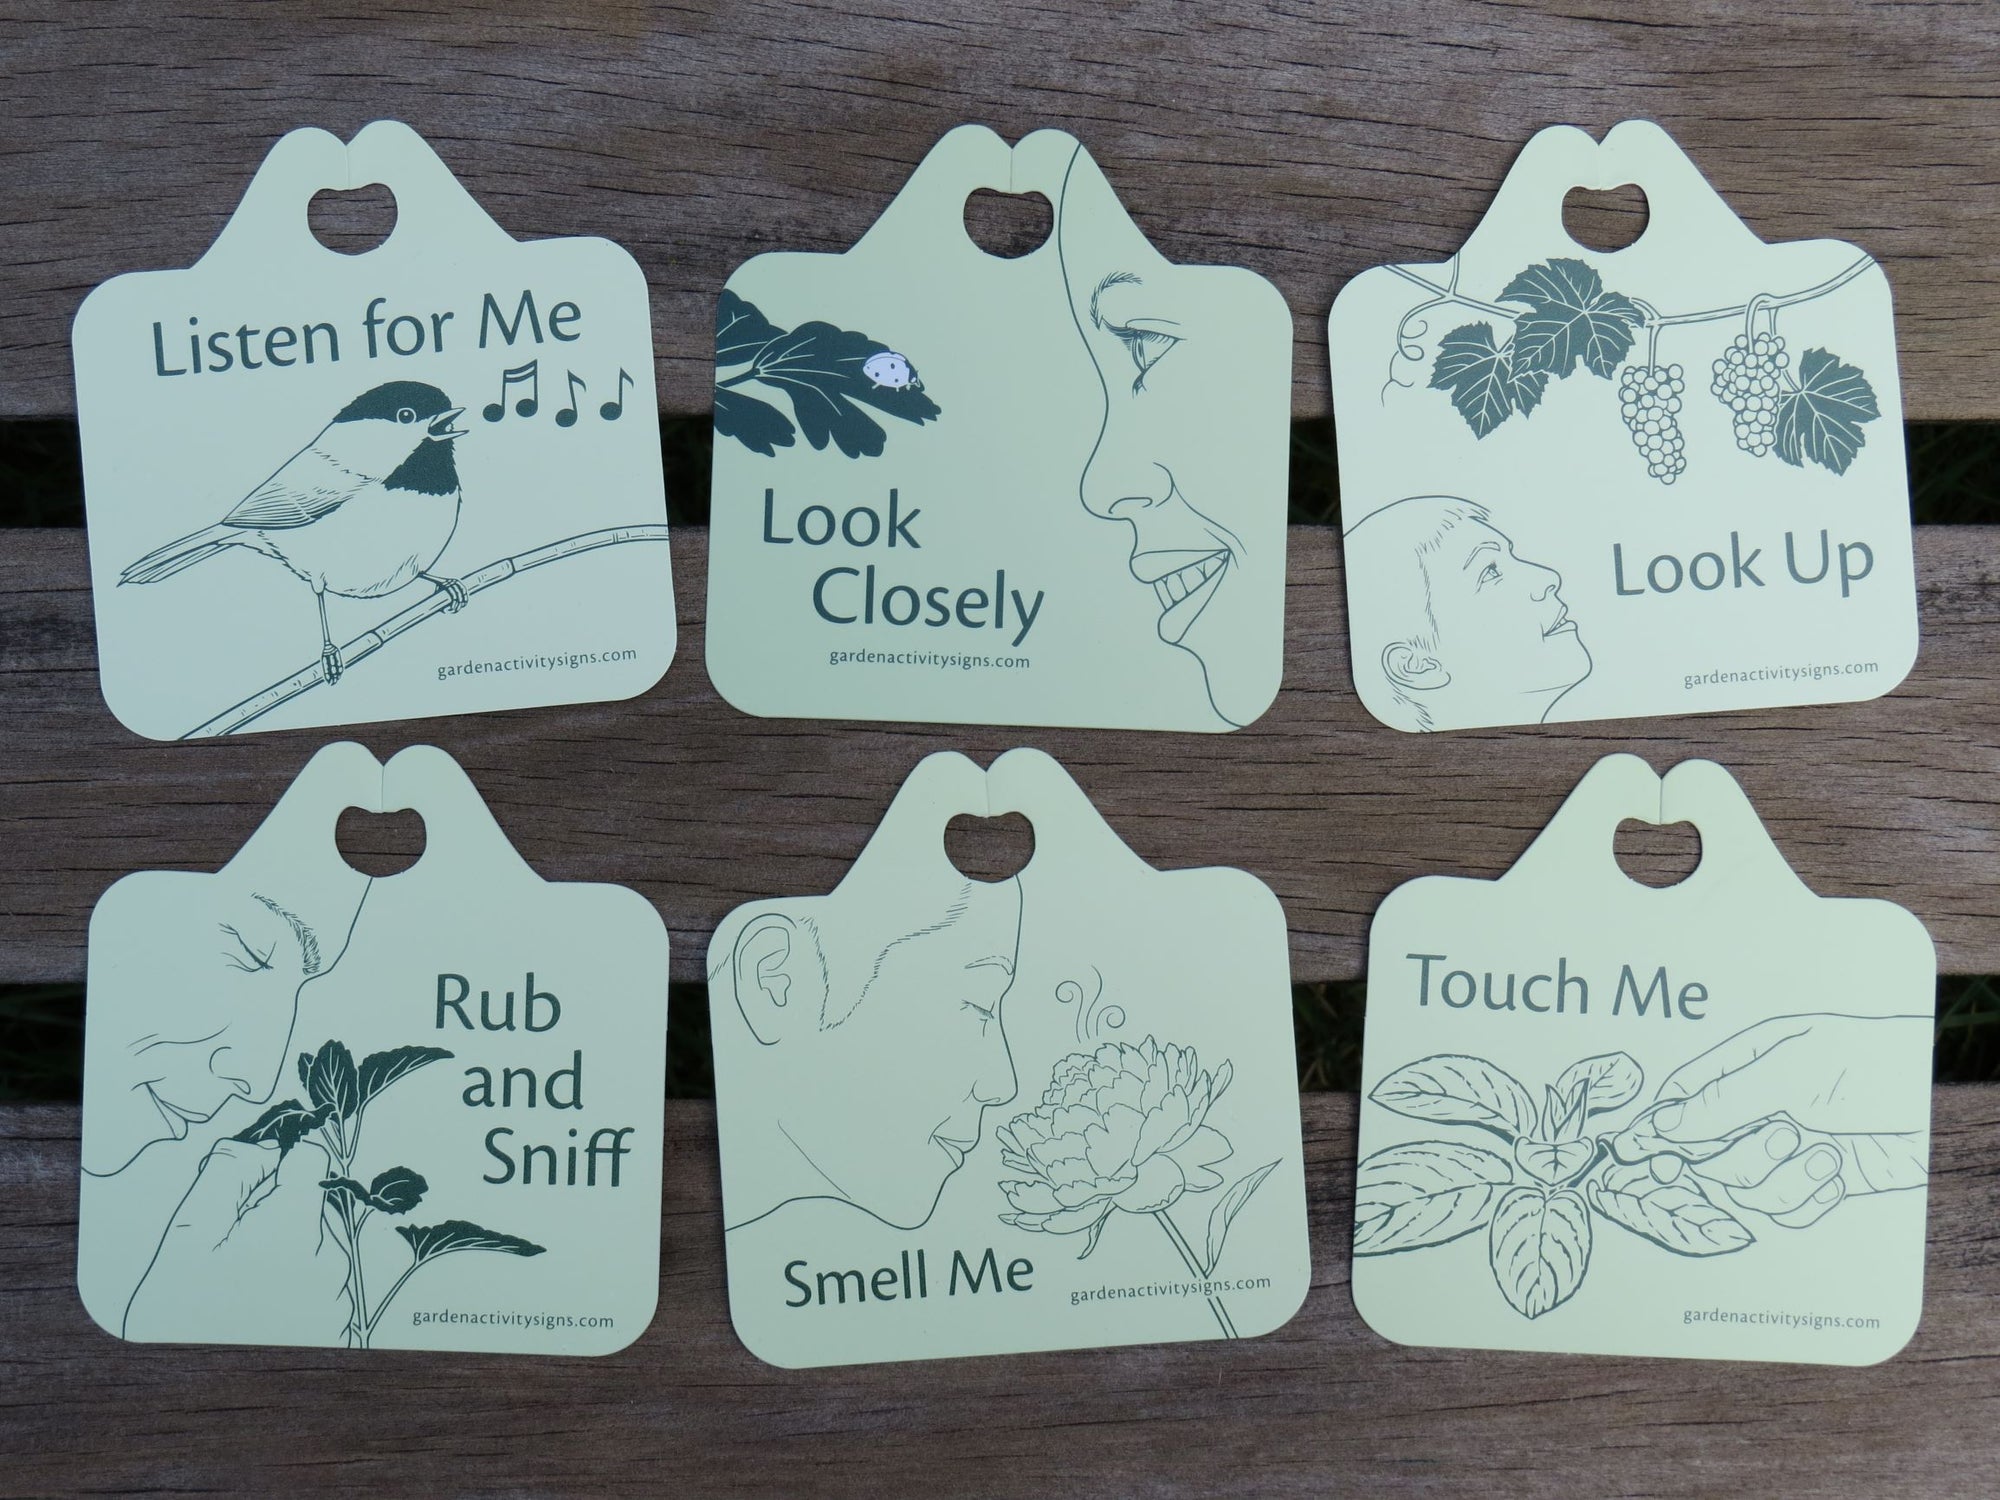 Sensory garden illustrated plant tags, set of 6 includes listen for me, look closely, look up, rub and sniff, smell me and touch me